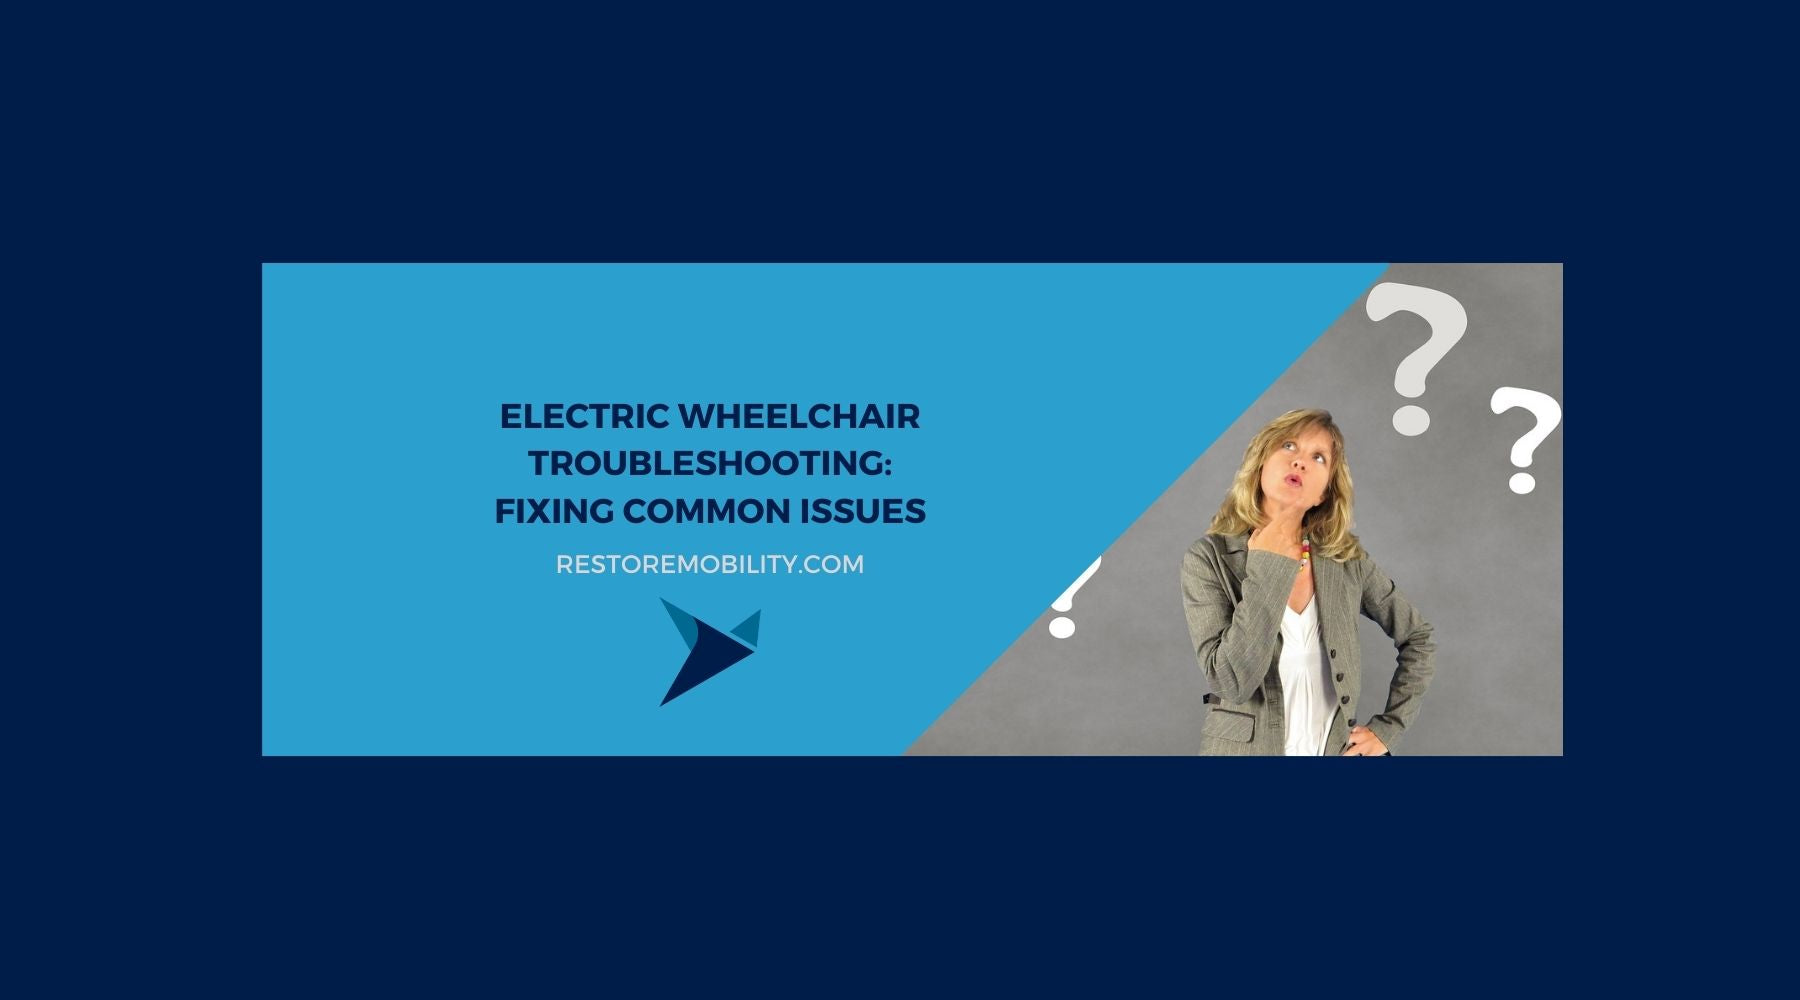 Electric Wheelchair Troubleshooting: Fixing Common Issues